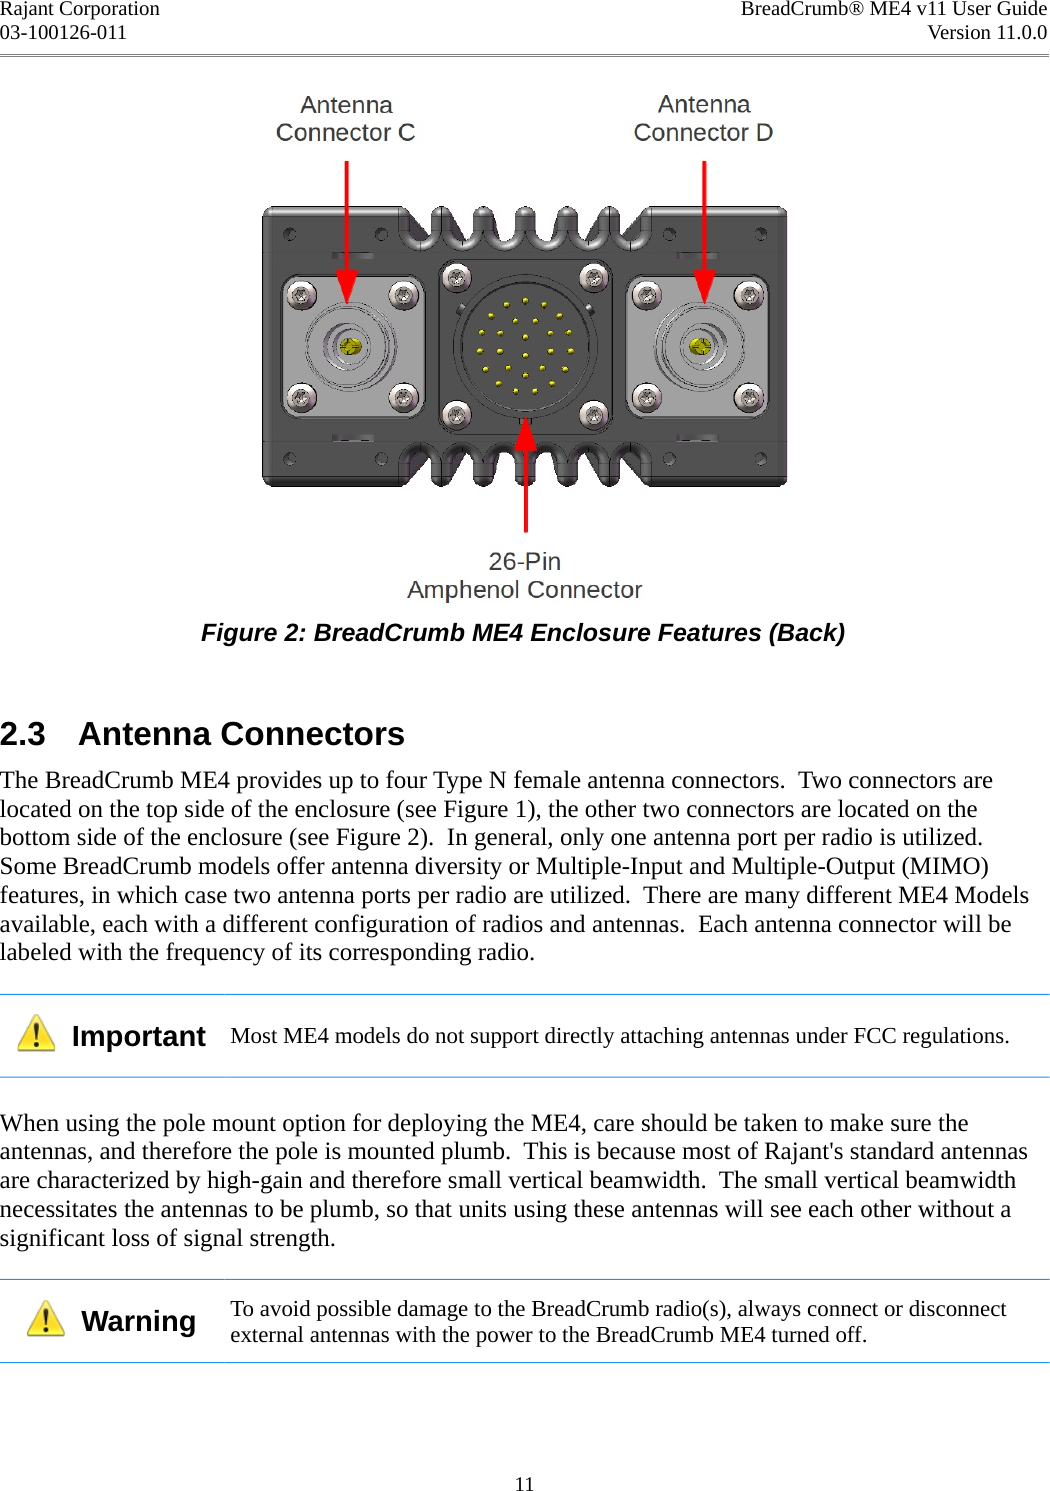 Rajant Corporation BreadCrumb® ME4 v11 User Guide03-100126-011 Version 11.0.0Figure 2: BreadCrumb ME4 Enclosure Features (Back)2.3  Antenna ConnectorsThe BreadCrumb ME4 provides up to four Type N female antenna connectors.  Two connectors are located on the top side of the enclosure (see Figure 1), the other two connectors are located on the bottom side of the enclosure (see Figure 2).  In general, only one antenna port per radio is utilized. Some BreadCrumb models offer antenna diversity or Multiple-Input and Multiple-Output (MIMO) features, in which case two antenna ports per radio are utilized.  There are many different ME4 Models available, each with a different configuration of radios and antennas.  Each antenna connector will be labeled with the frequency of its corresponding radio.  Important Most ME4 models do not support directly attaching antennas under FCC regulations.When using the pole mount option for deploying the ME4, care should be taken to make sure the antennas, and therefore the pole is mounted plumb.  This is because most of Rajant&apos;s standard antennas are characterized by high-gain and therefore small vertical beamwidth.  The small vertical beamwidth necessitates the antennas to be plumb, so that units using these antennas will see each other without a significant loss of signal strength.  Warning To avoid possible damage to the BreadCrumb radio(s), always connect or disconnect external antennas with the power to the BreadCrumb ME4 turned off. 11